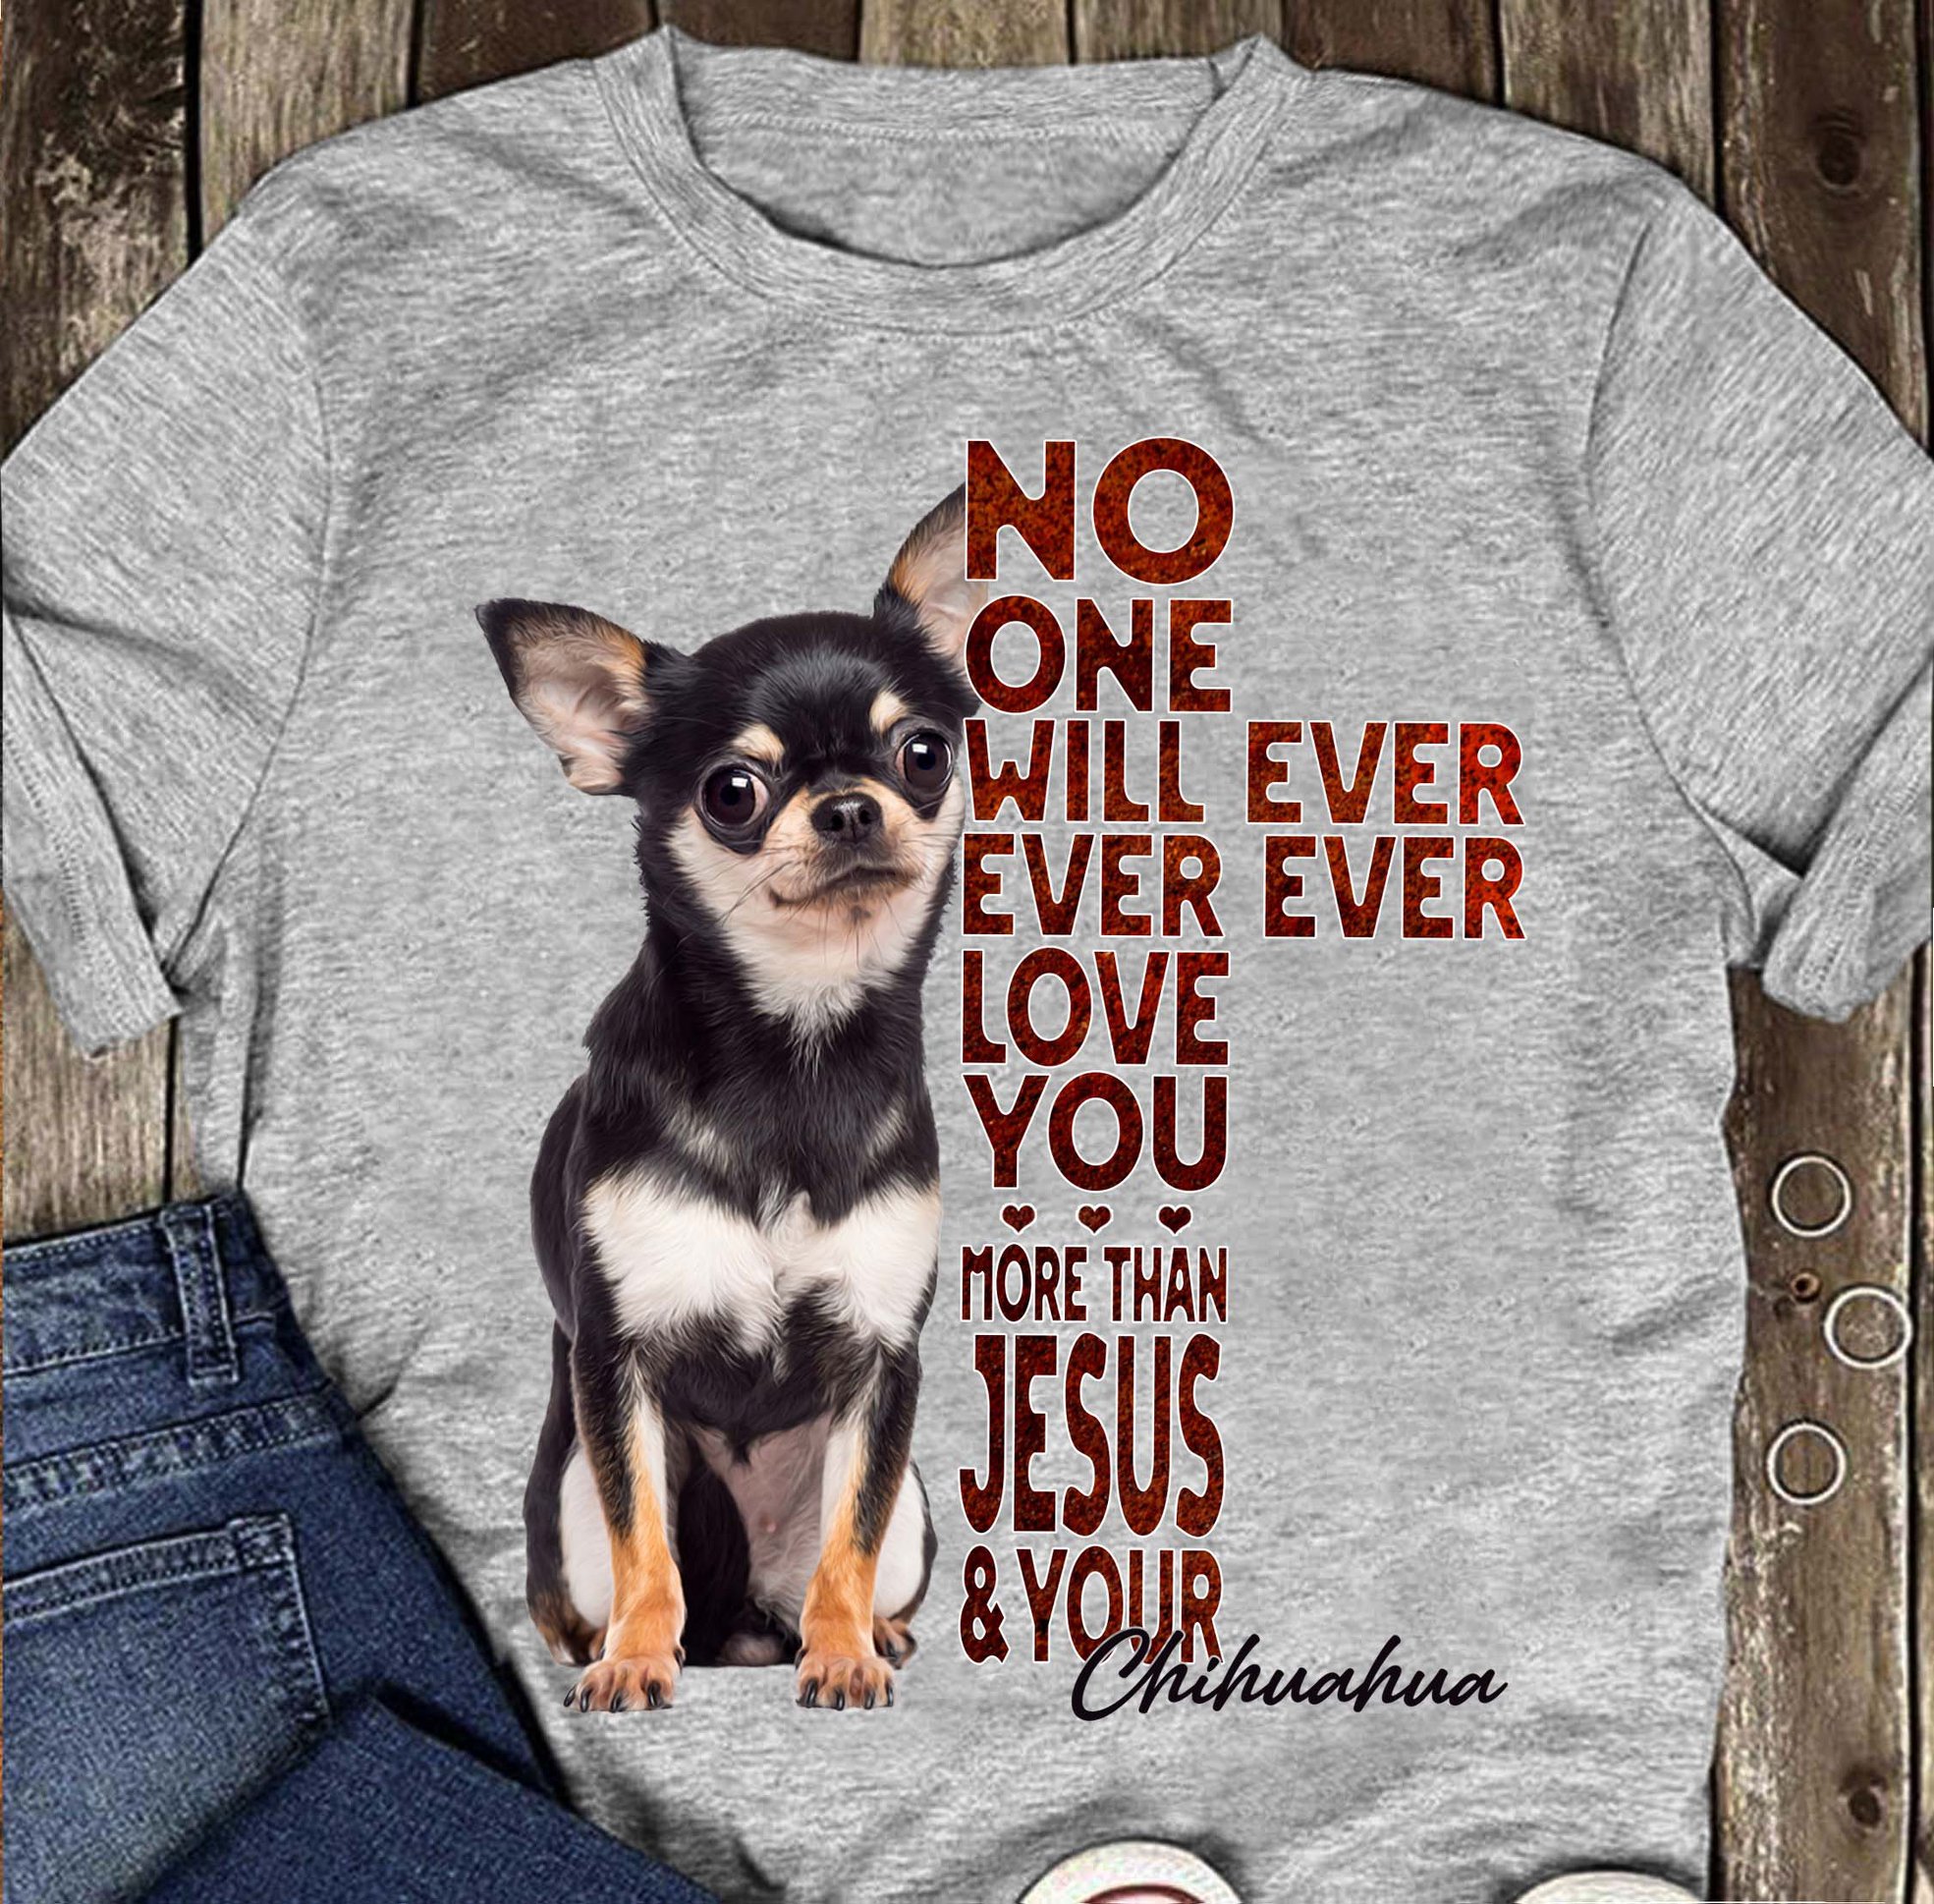 Chihuahua- No one will ever ever ever love you more than Jesus & Your